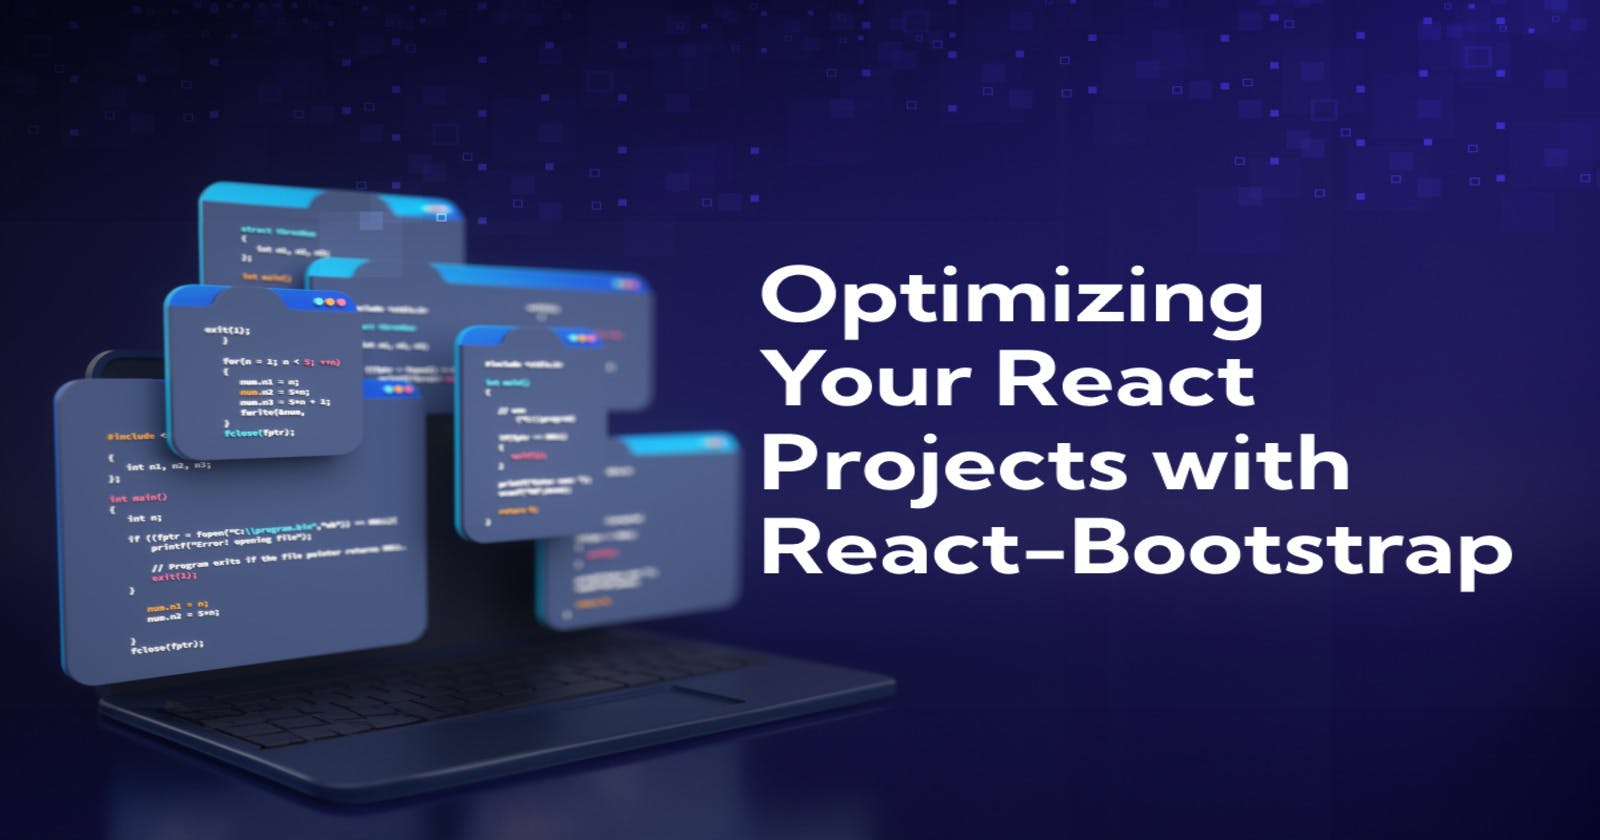 Optimizing Your React Projects with React-Bootstrap